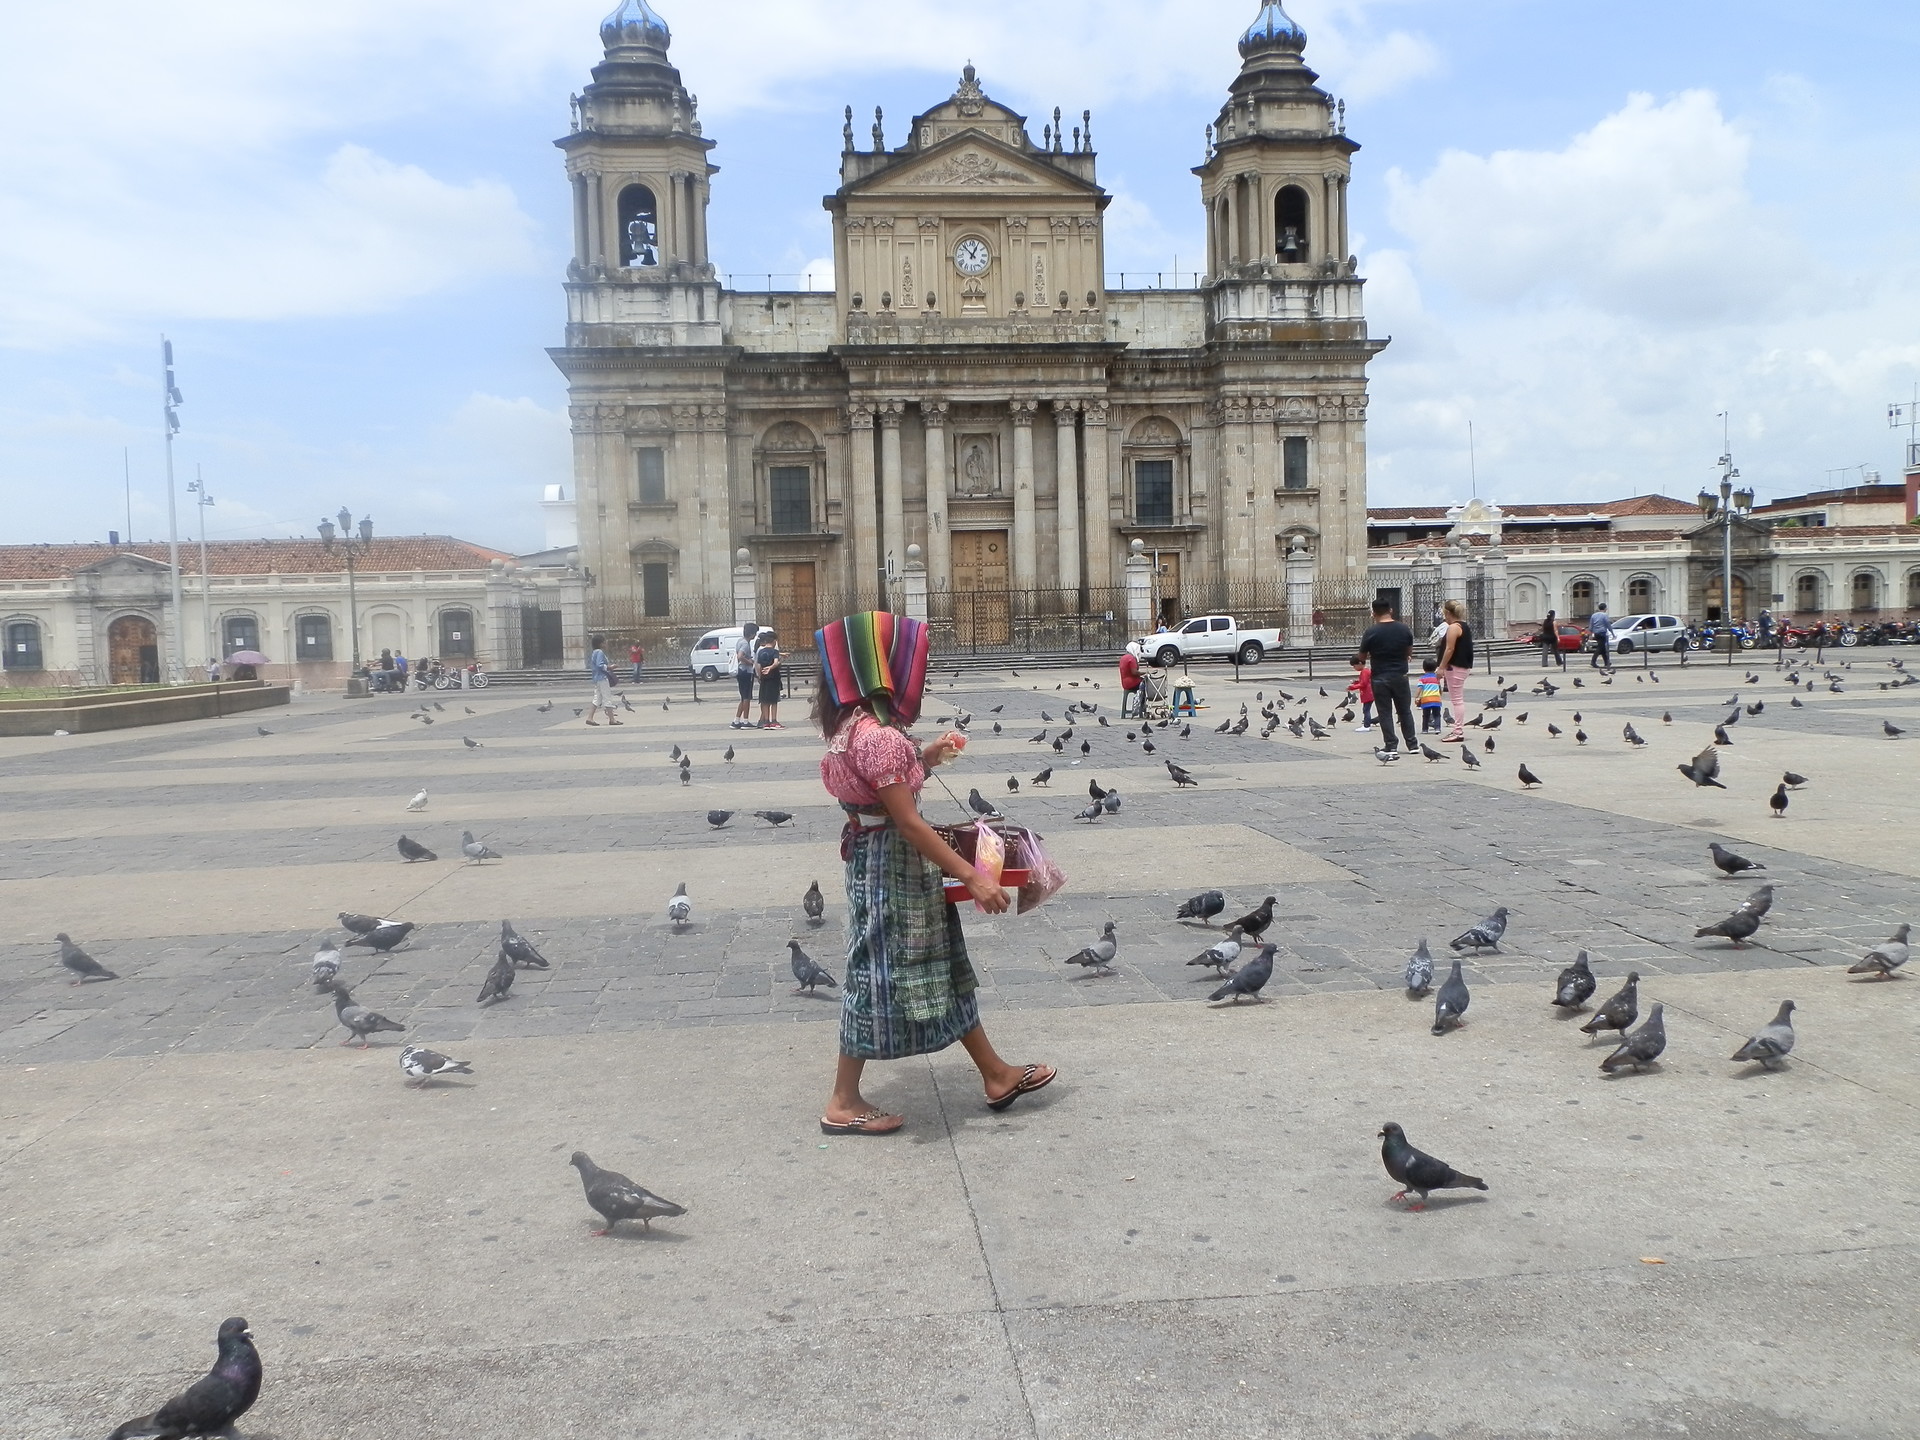 Guatemala city - I almost could not leave Guatemala